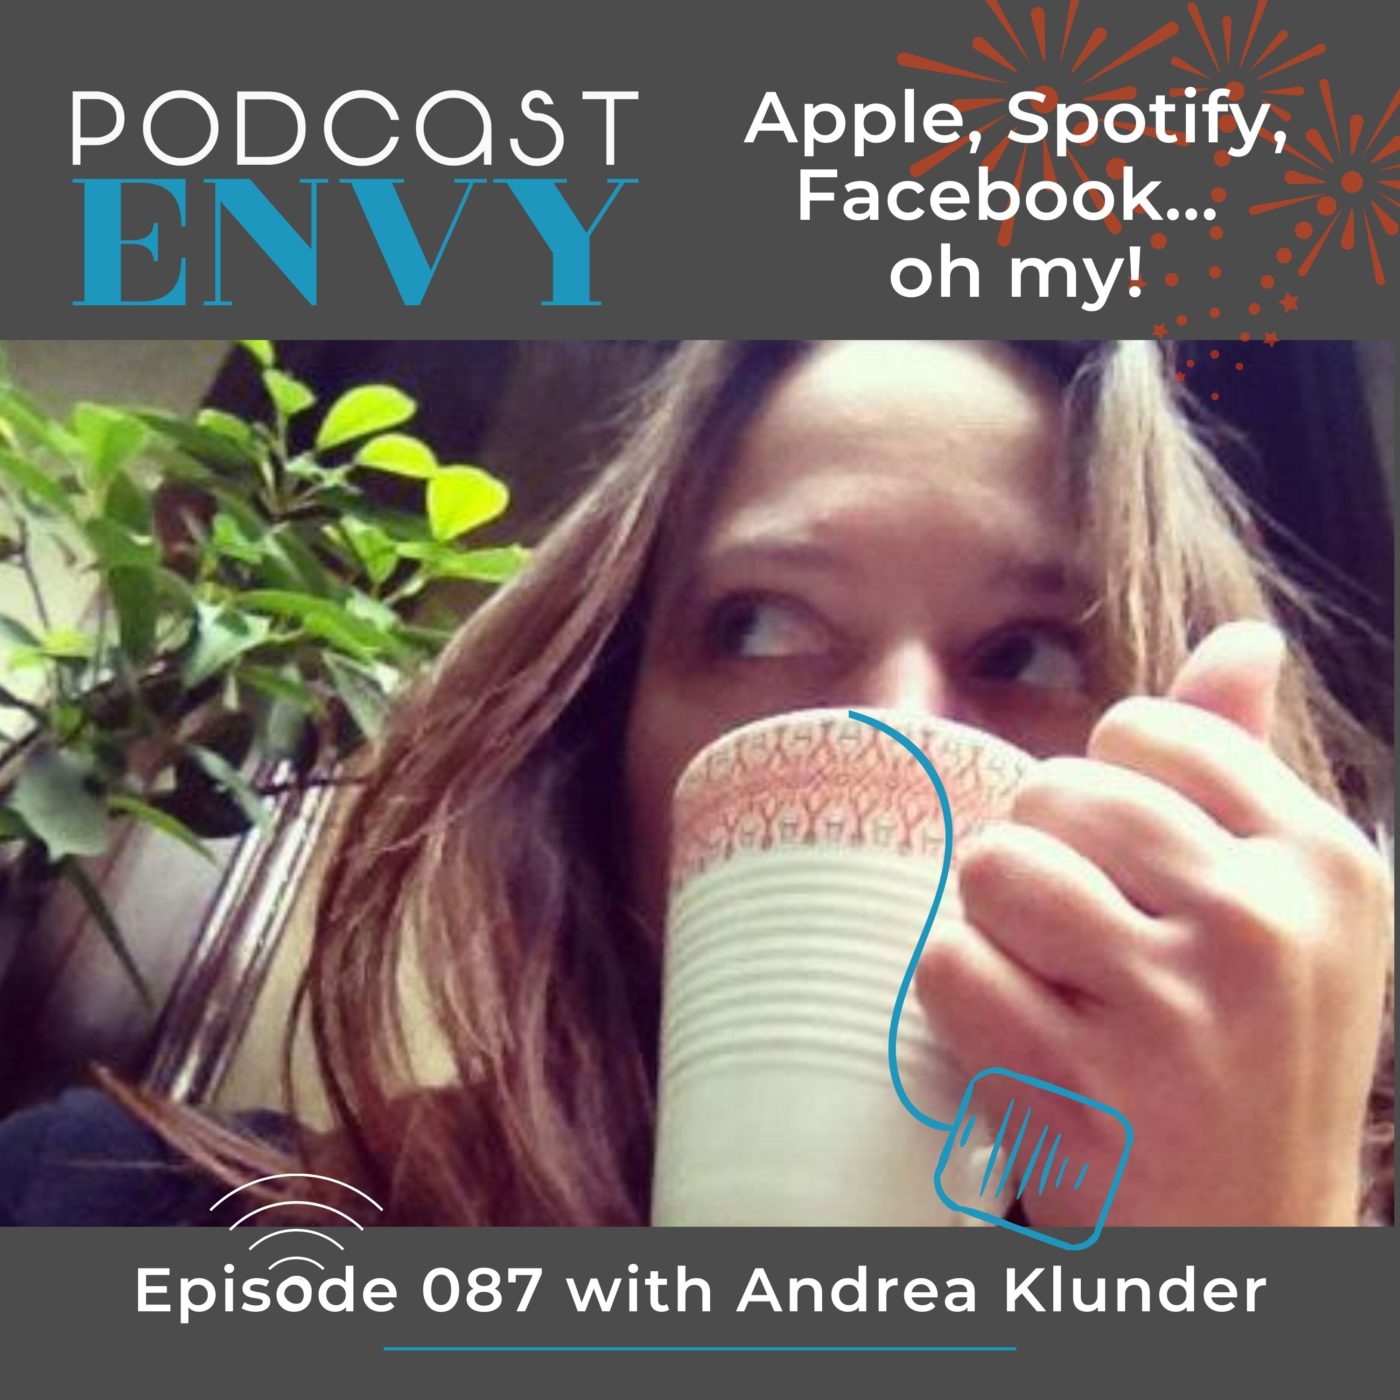 087: Apple, Spotify, Facebook… oh my! New opportunities in podcasting?